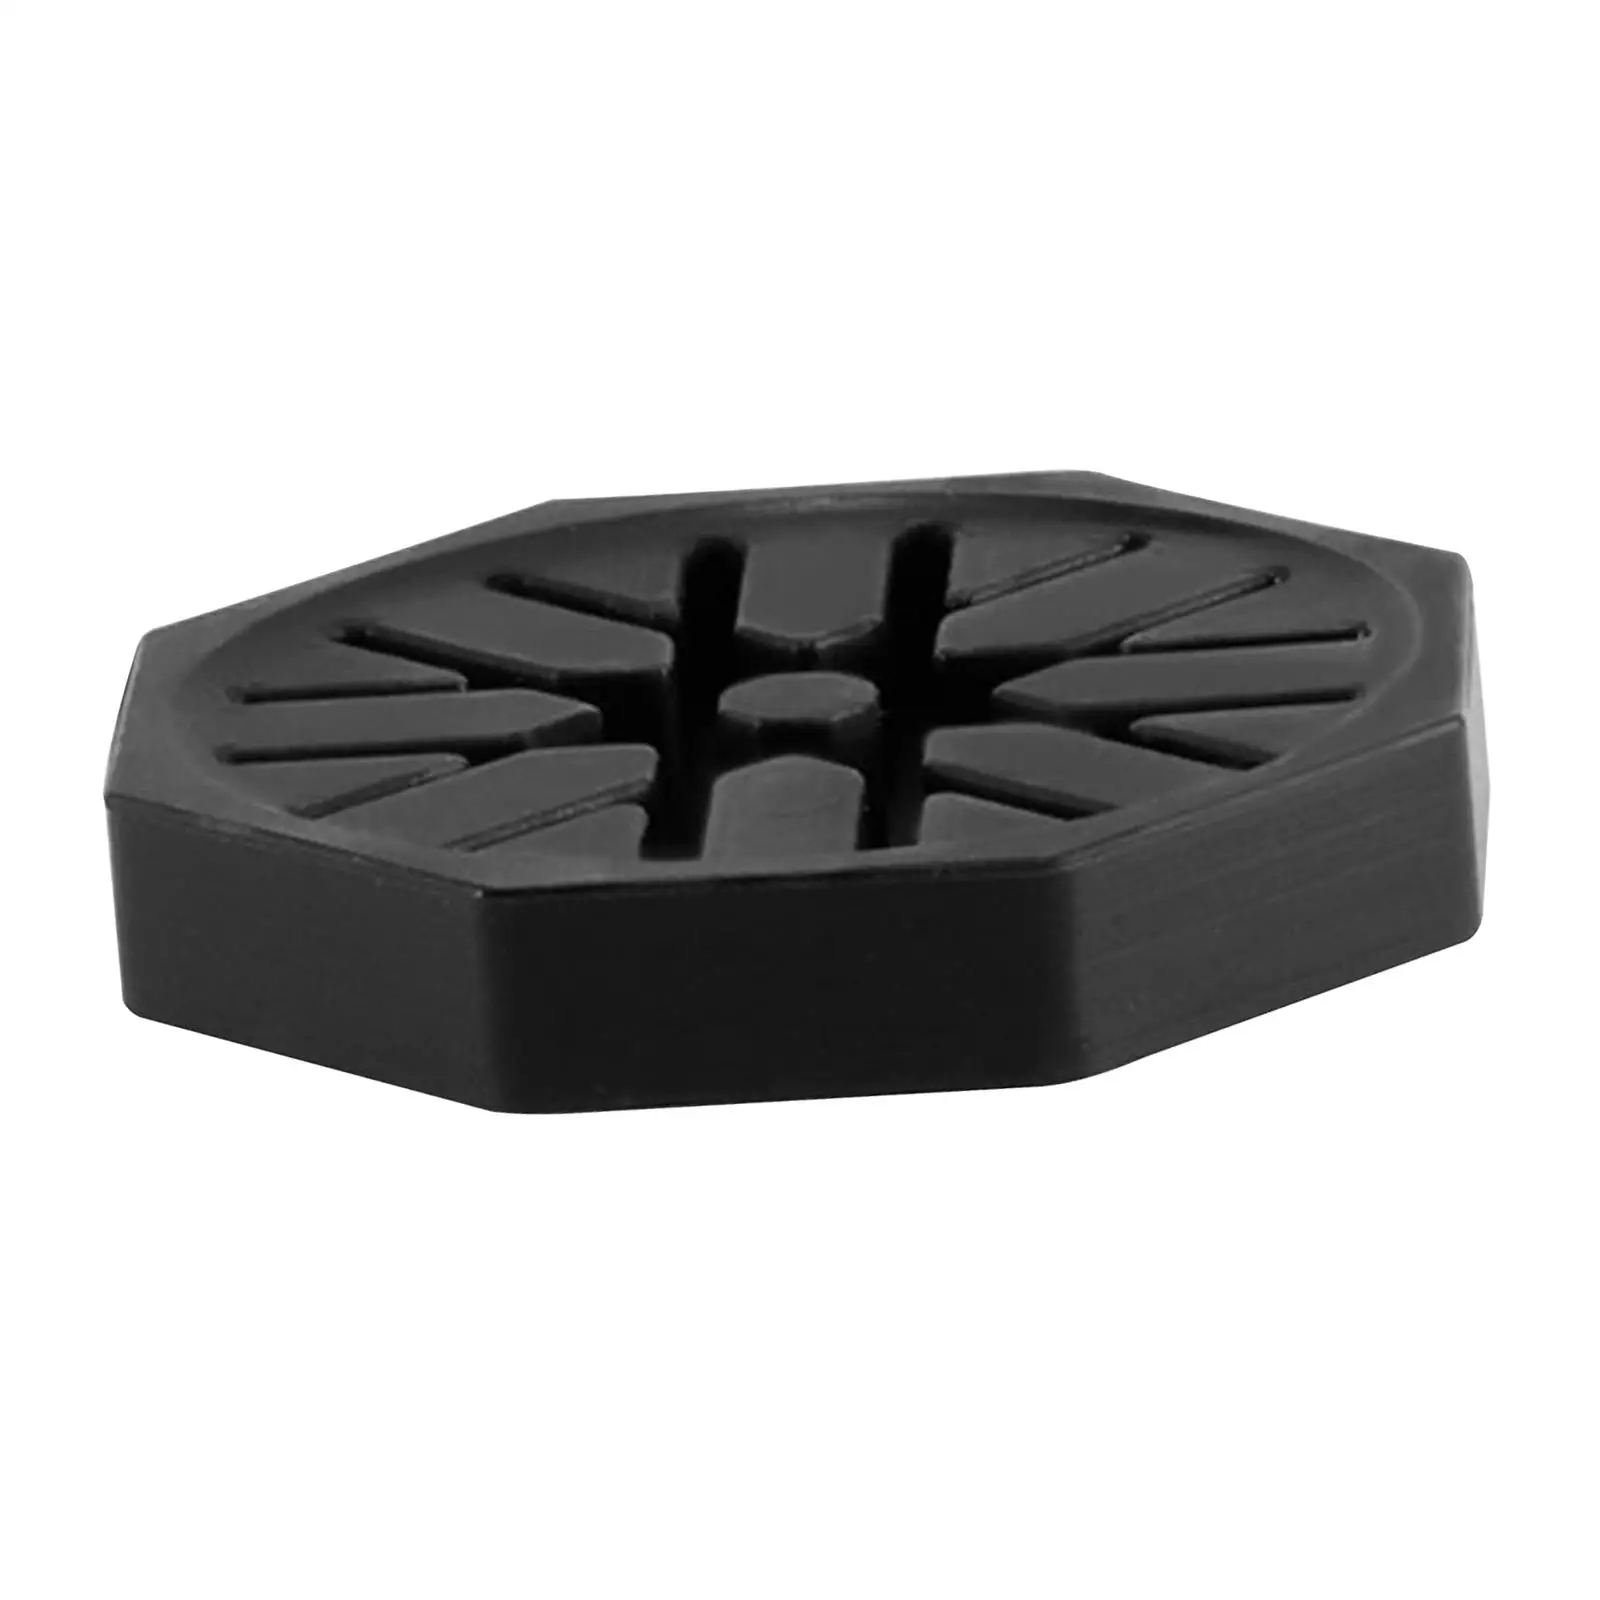 Silicone Puck Screen Holder Coffee Portafilter Cleaner Espresso Puck stand Reusable Basket Coffee Filters